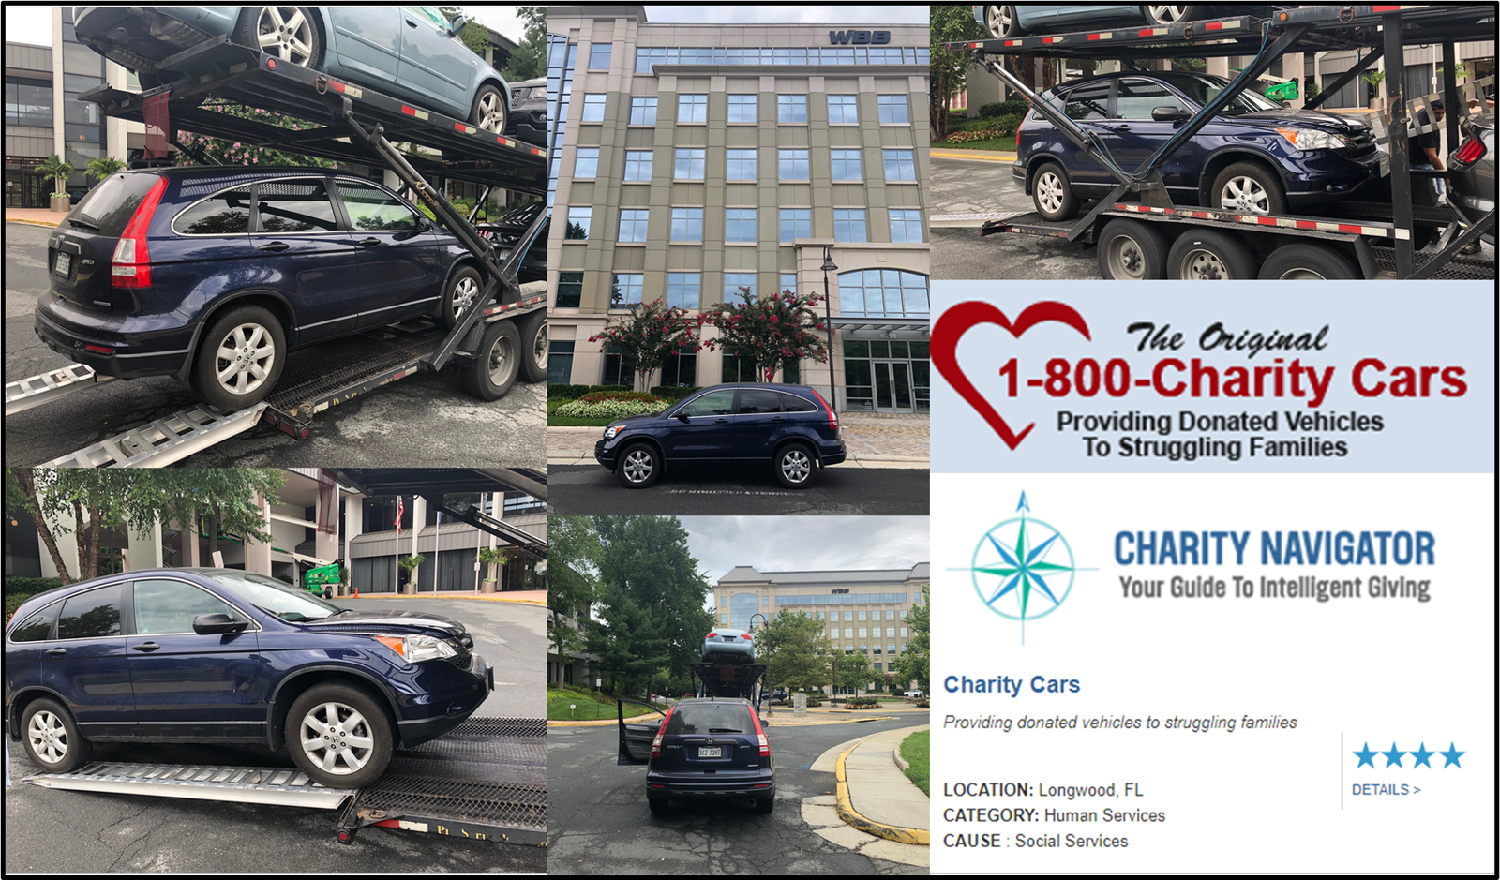 WBB donated a vehicle to Charity Cars. The vehicle will be given to a family in need.